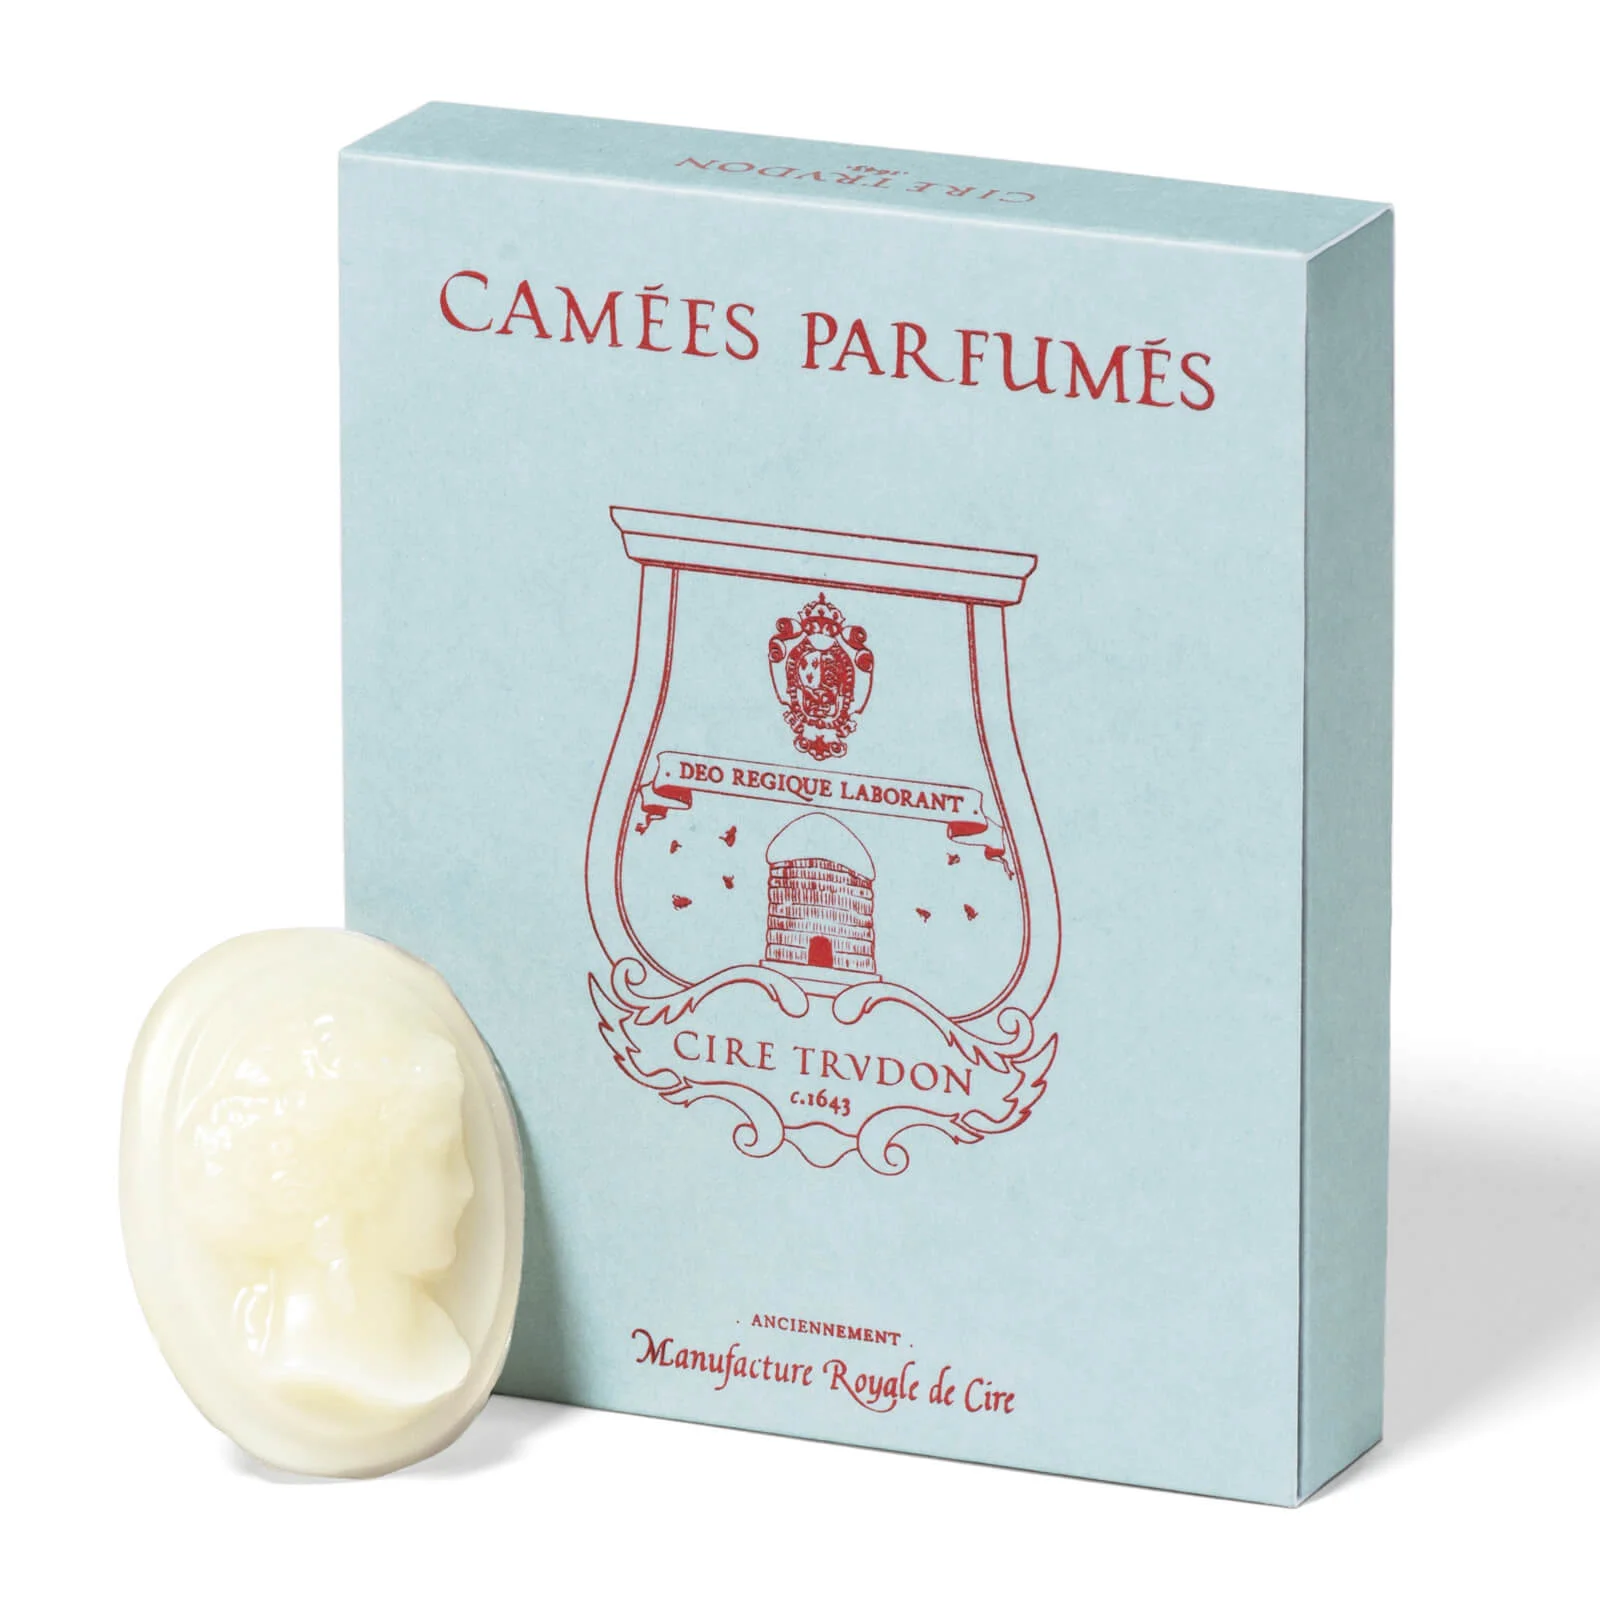 TRUDON Cire Scented Cameos - Beeswax Absolute Image 1